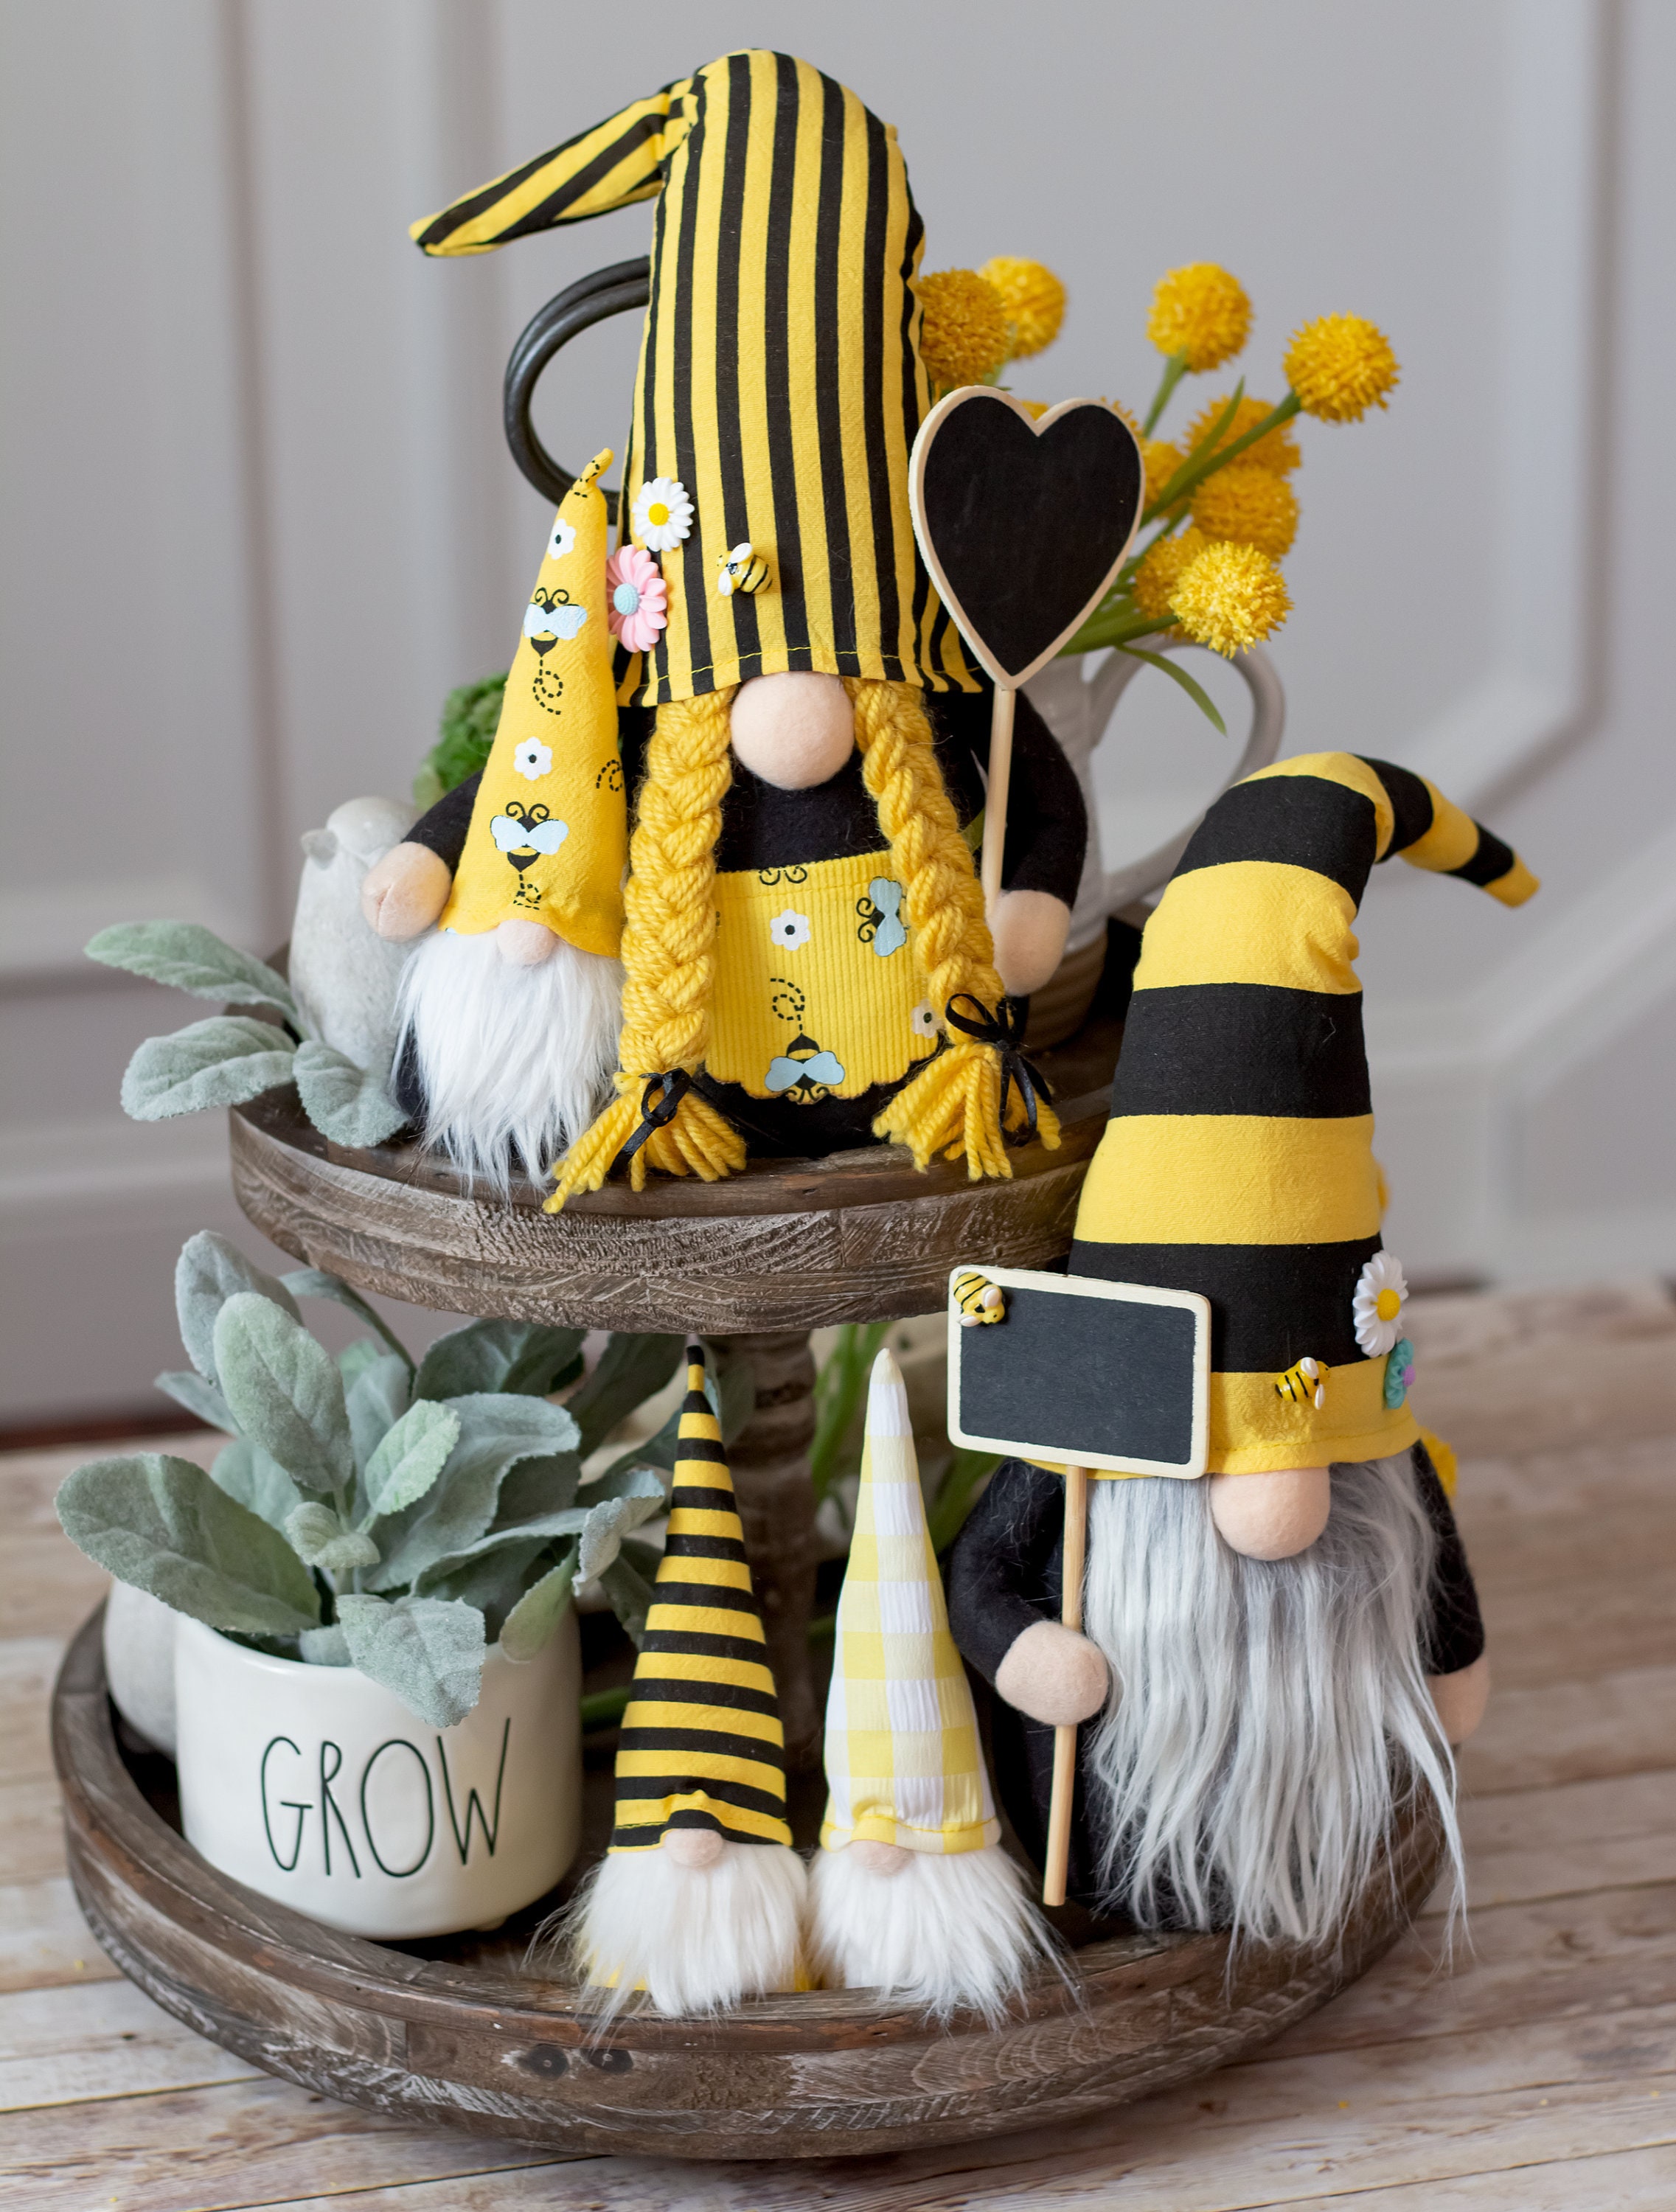 Bee Family - Spring Gnomes - Mini Gnomes - Medium sized gnomes - Easter -  Spring decorating - Family of gnomes - Birthday gift 